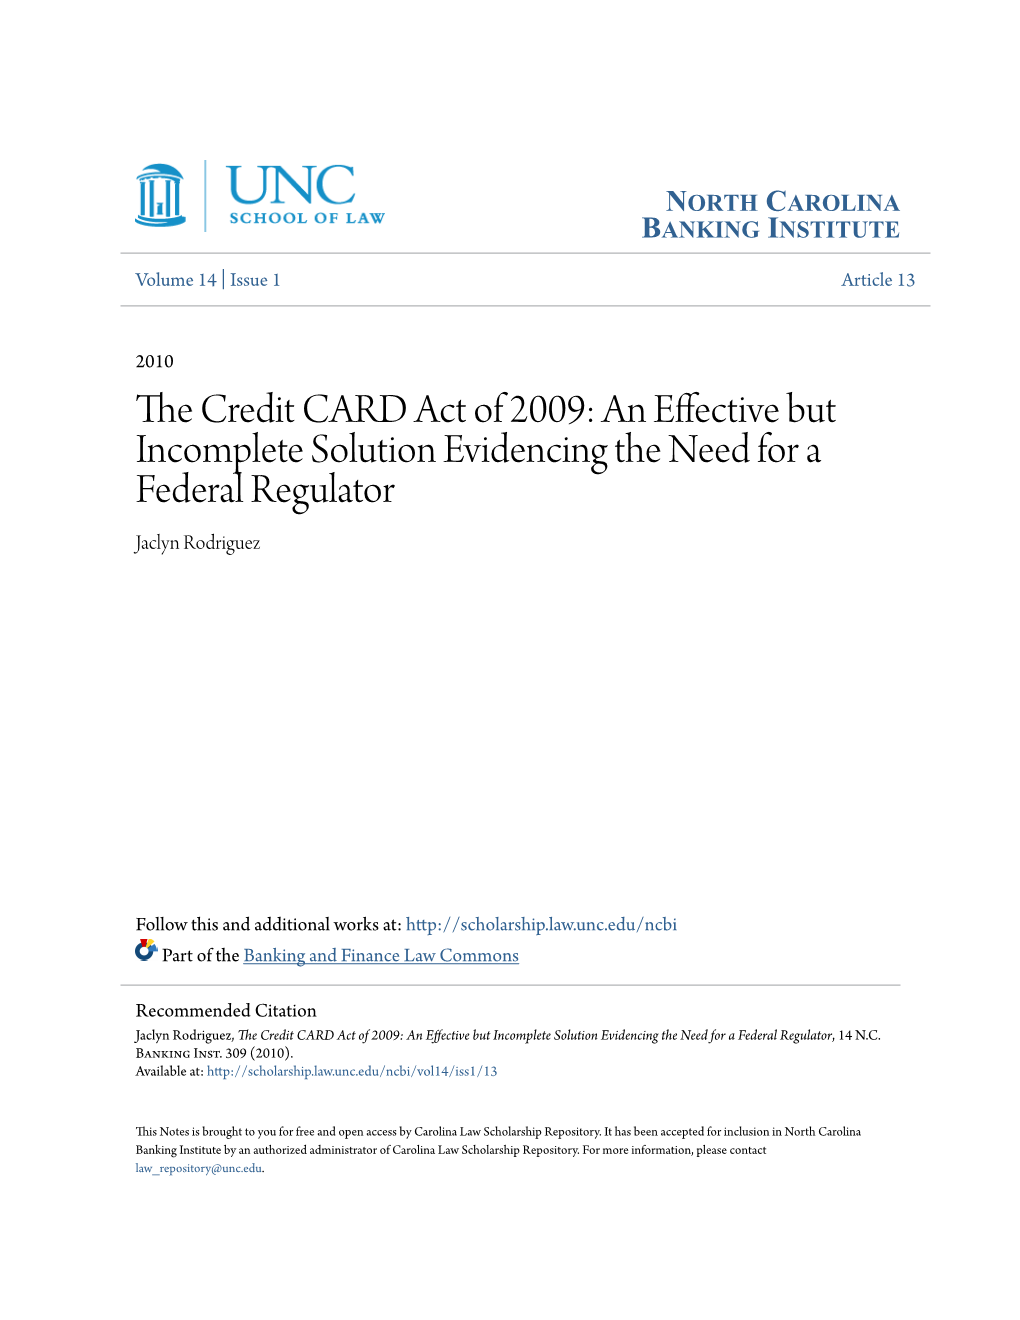 The Credit CARD Act of 2009: an Effective but Incomplete Solution Evidencing the Need for a Federal Regulator, 14 N.C